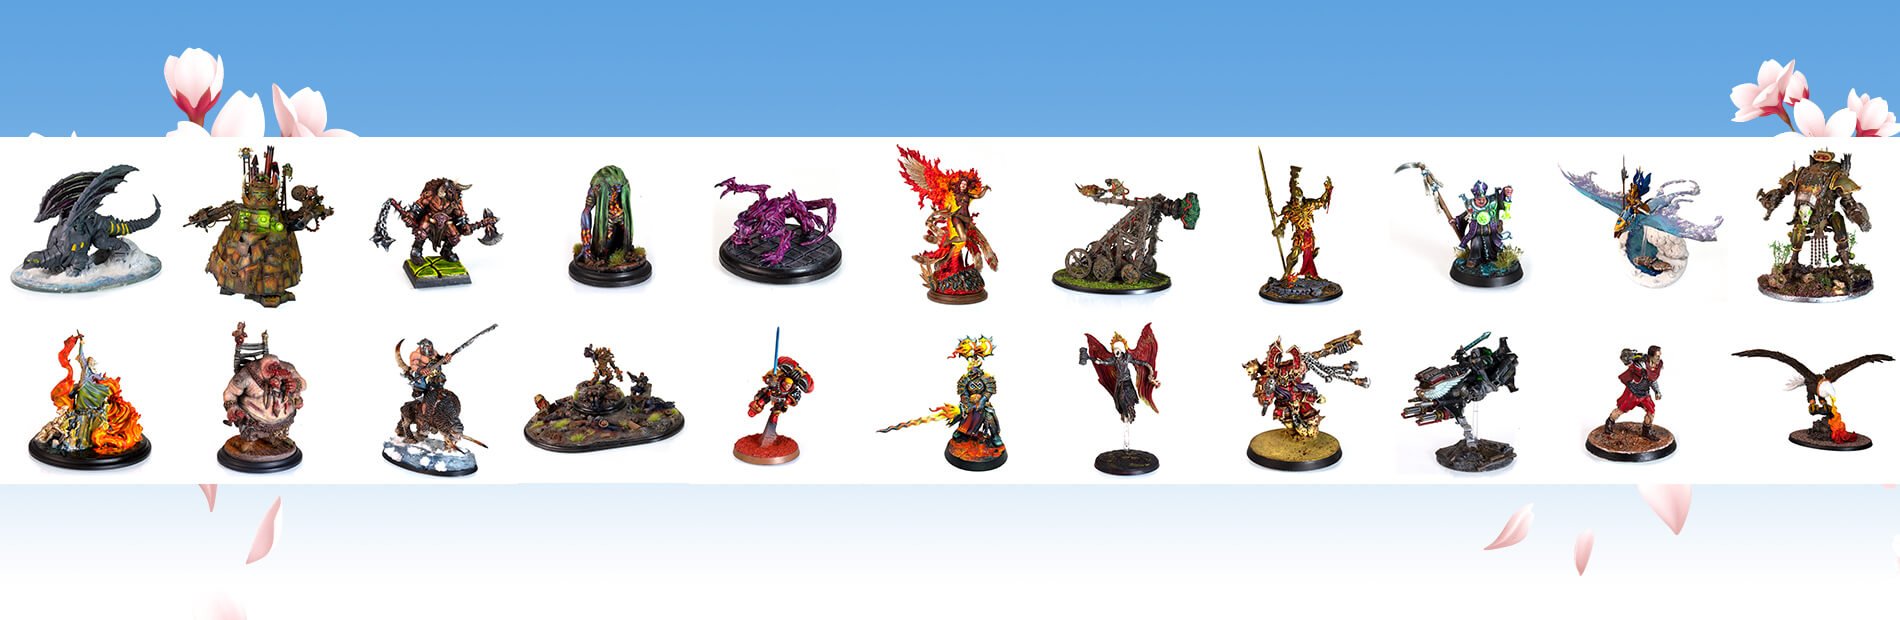 Top 10 Tools to Get Started in Miniature Painting — Wayland Games Blog -  Tabletop Gaming Blog